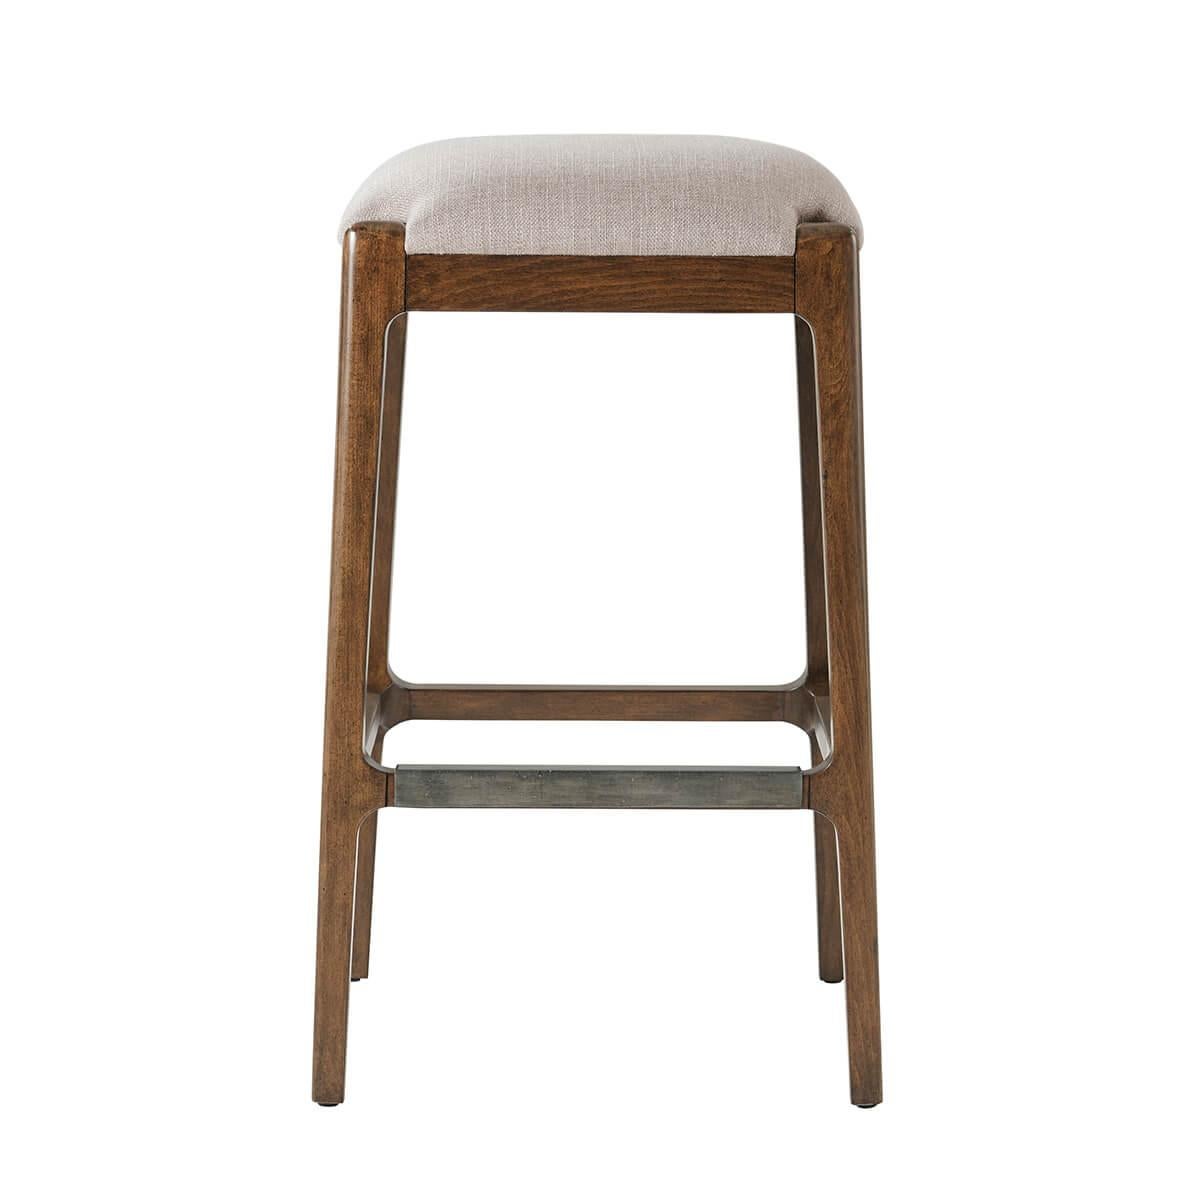 with an upholstered cushion seat covered in performance fabric, on splayed tapering legs joined by a stretcher in a slightly distressed warm color finish.

Dimensions: 18